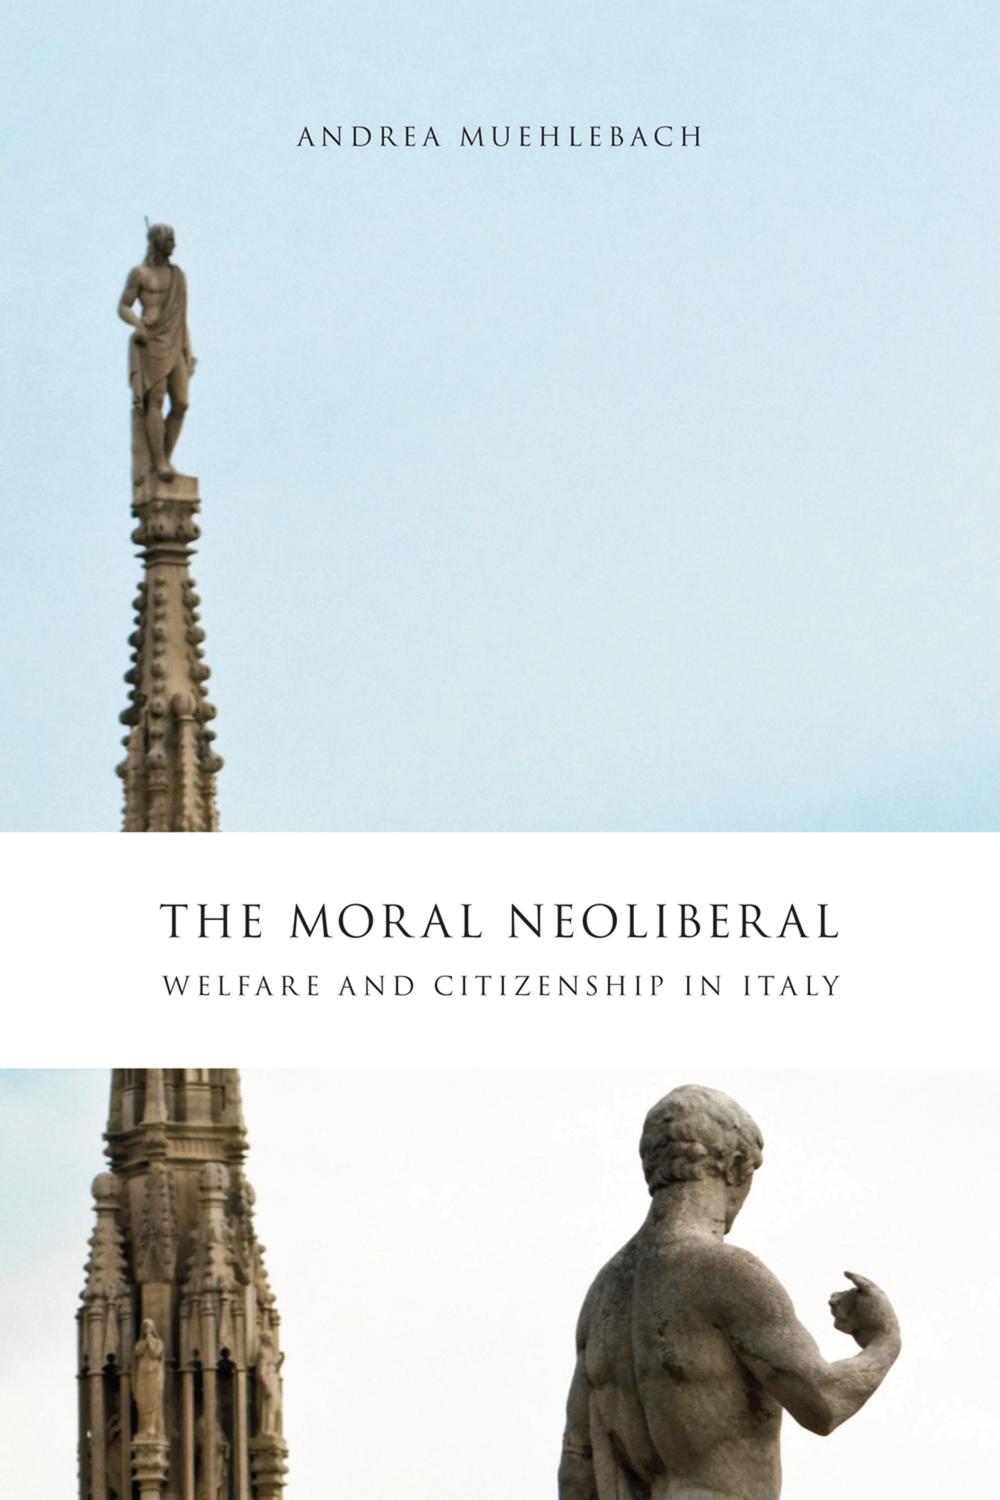 The Moral Neoliberal - Andrea Muehlebach